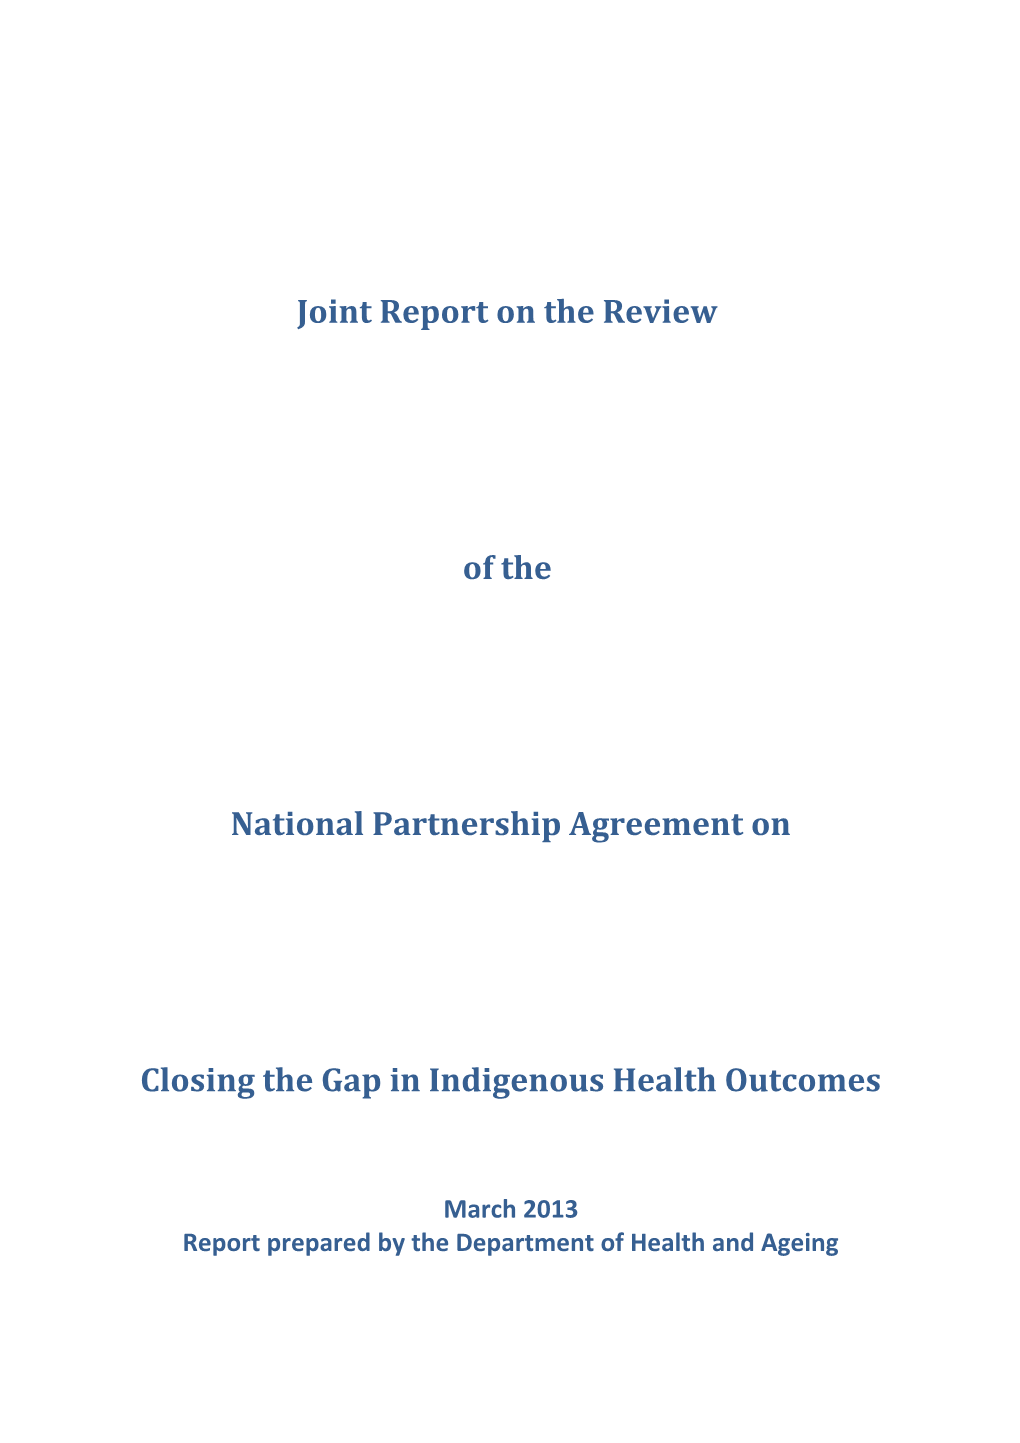 Joint Report on the Review of the NPA on CTG in Indigenous Health Outcomes